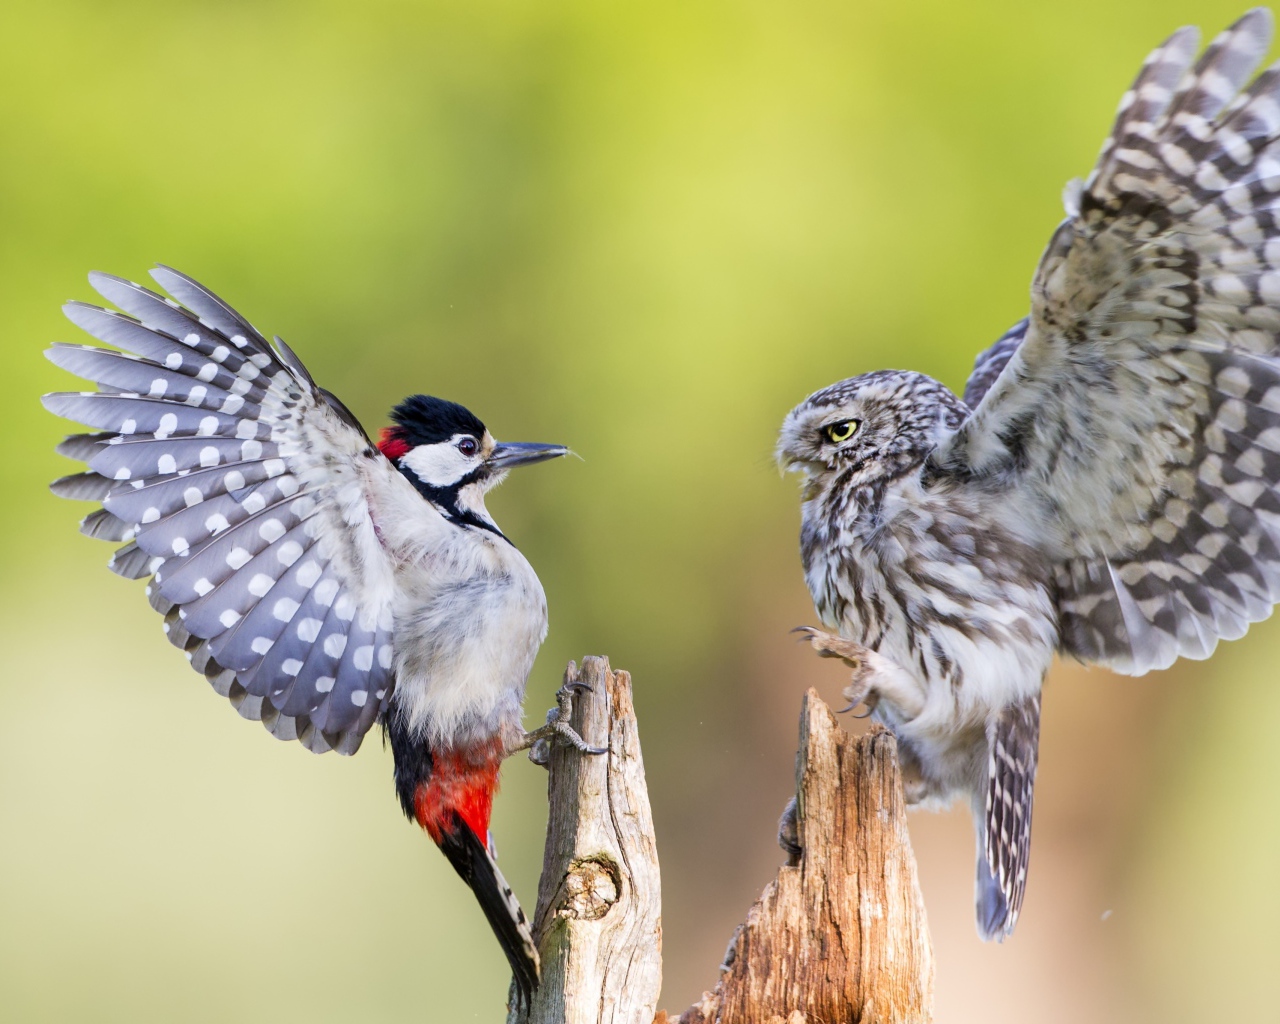 Quarrel of an owl and woodpecker on a dry tree